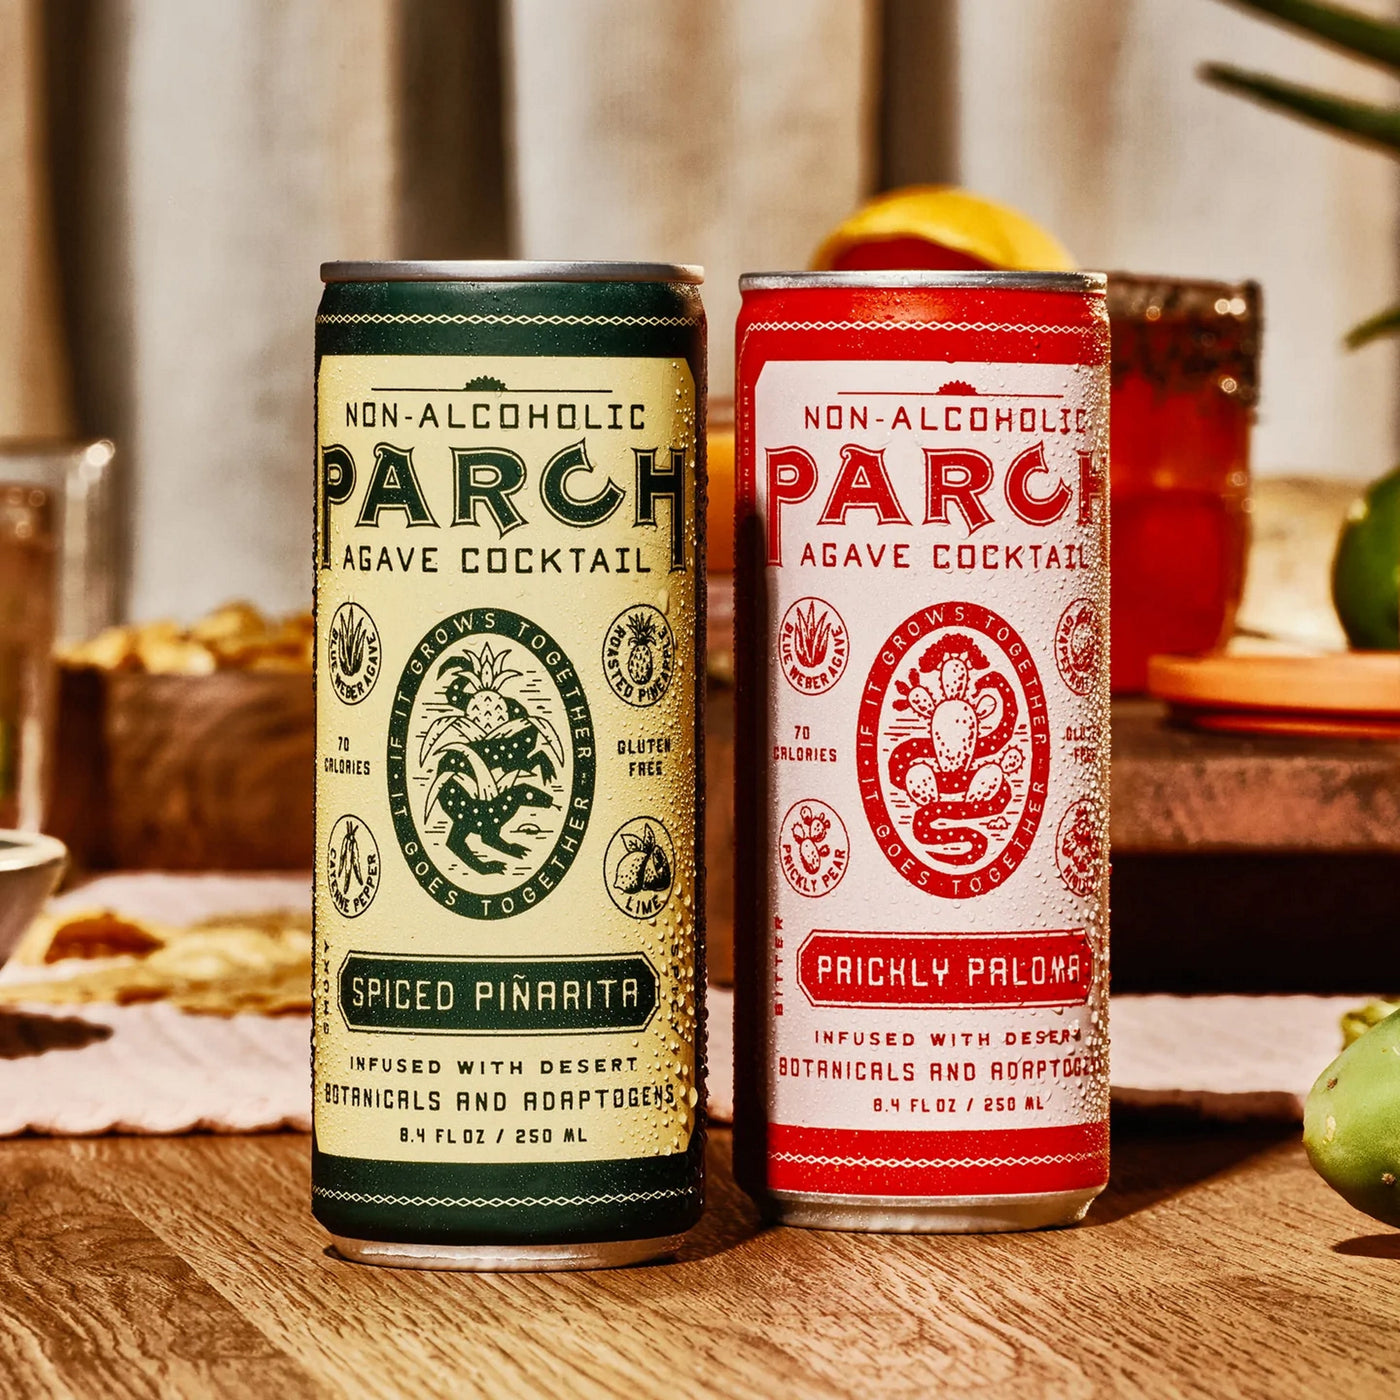 Non-Alcoholic Mixed Pack of mexican inspired cocktails - with adaptogens - an ancient ritual - enjoy the drink and your time